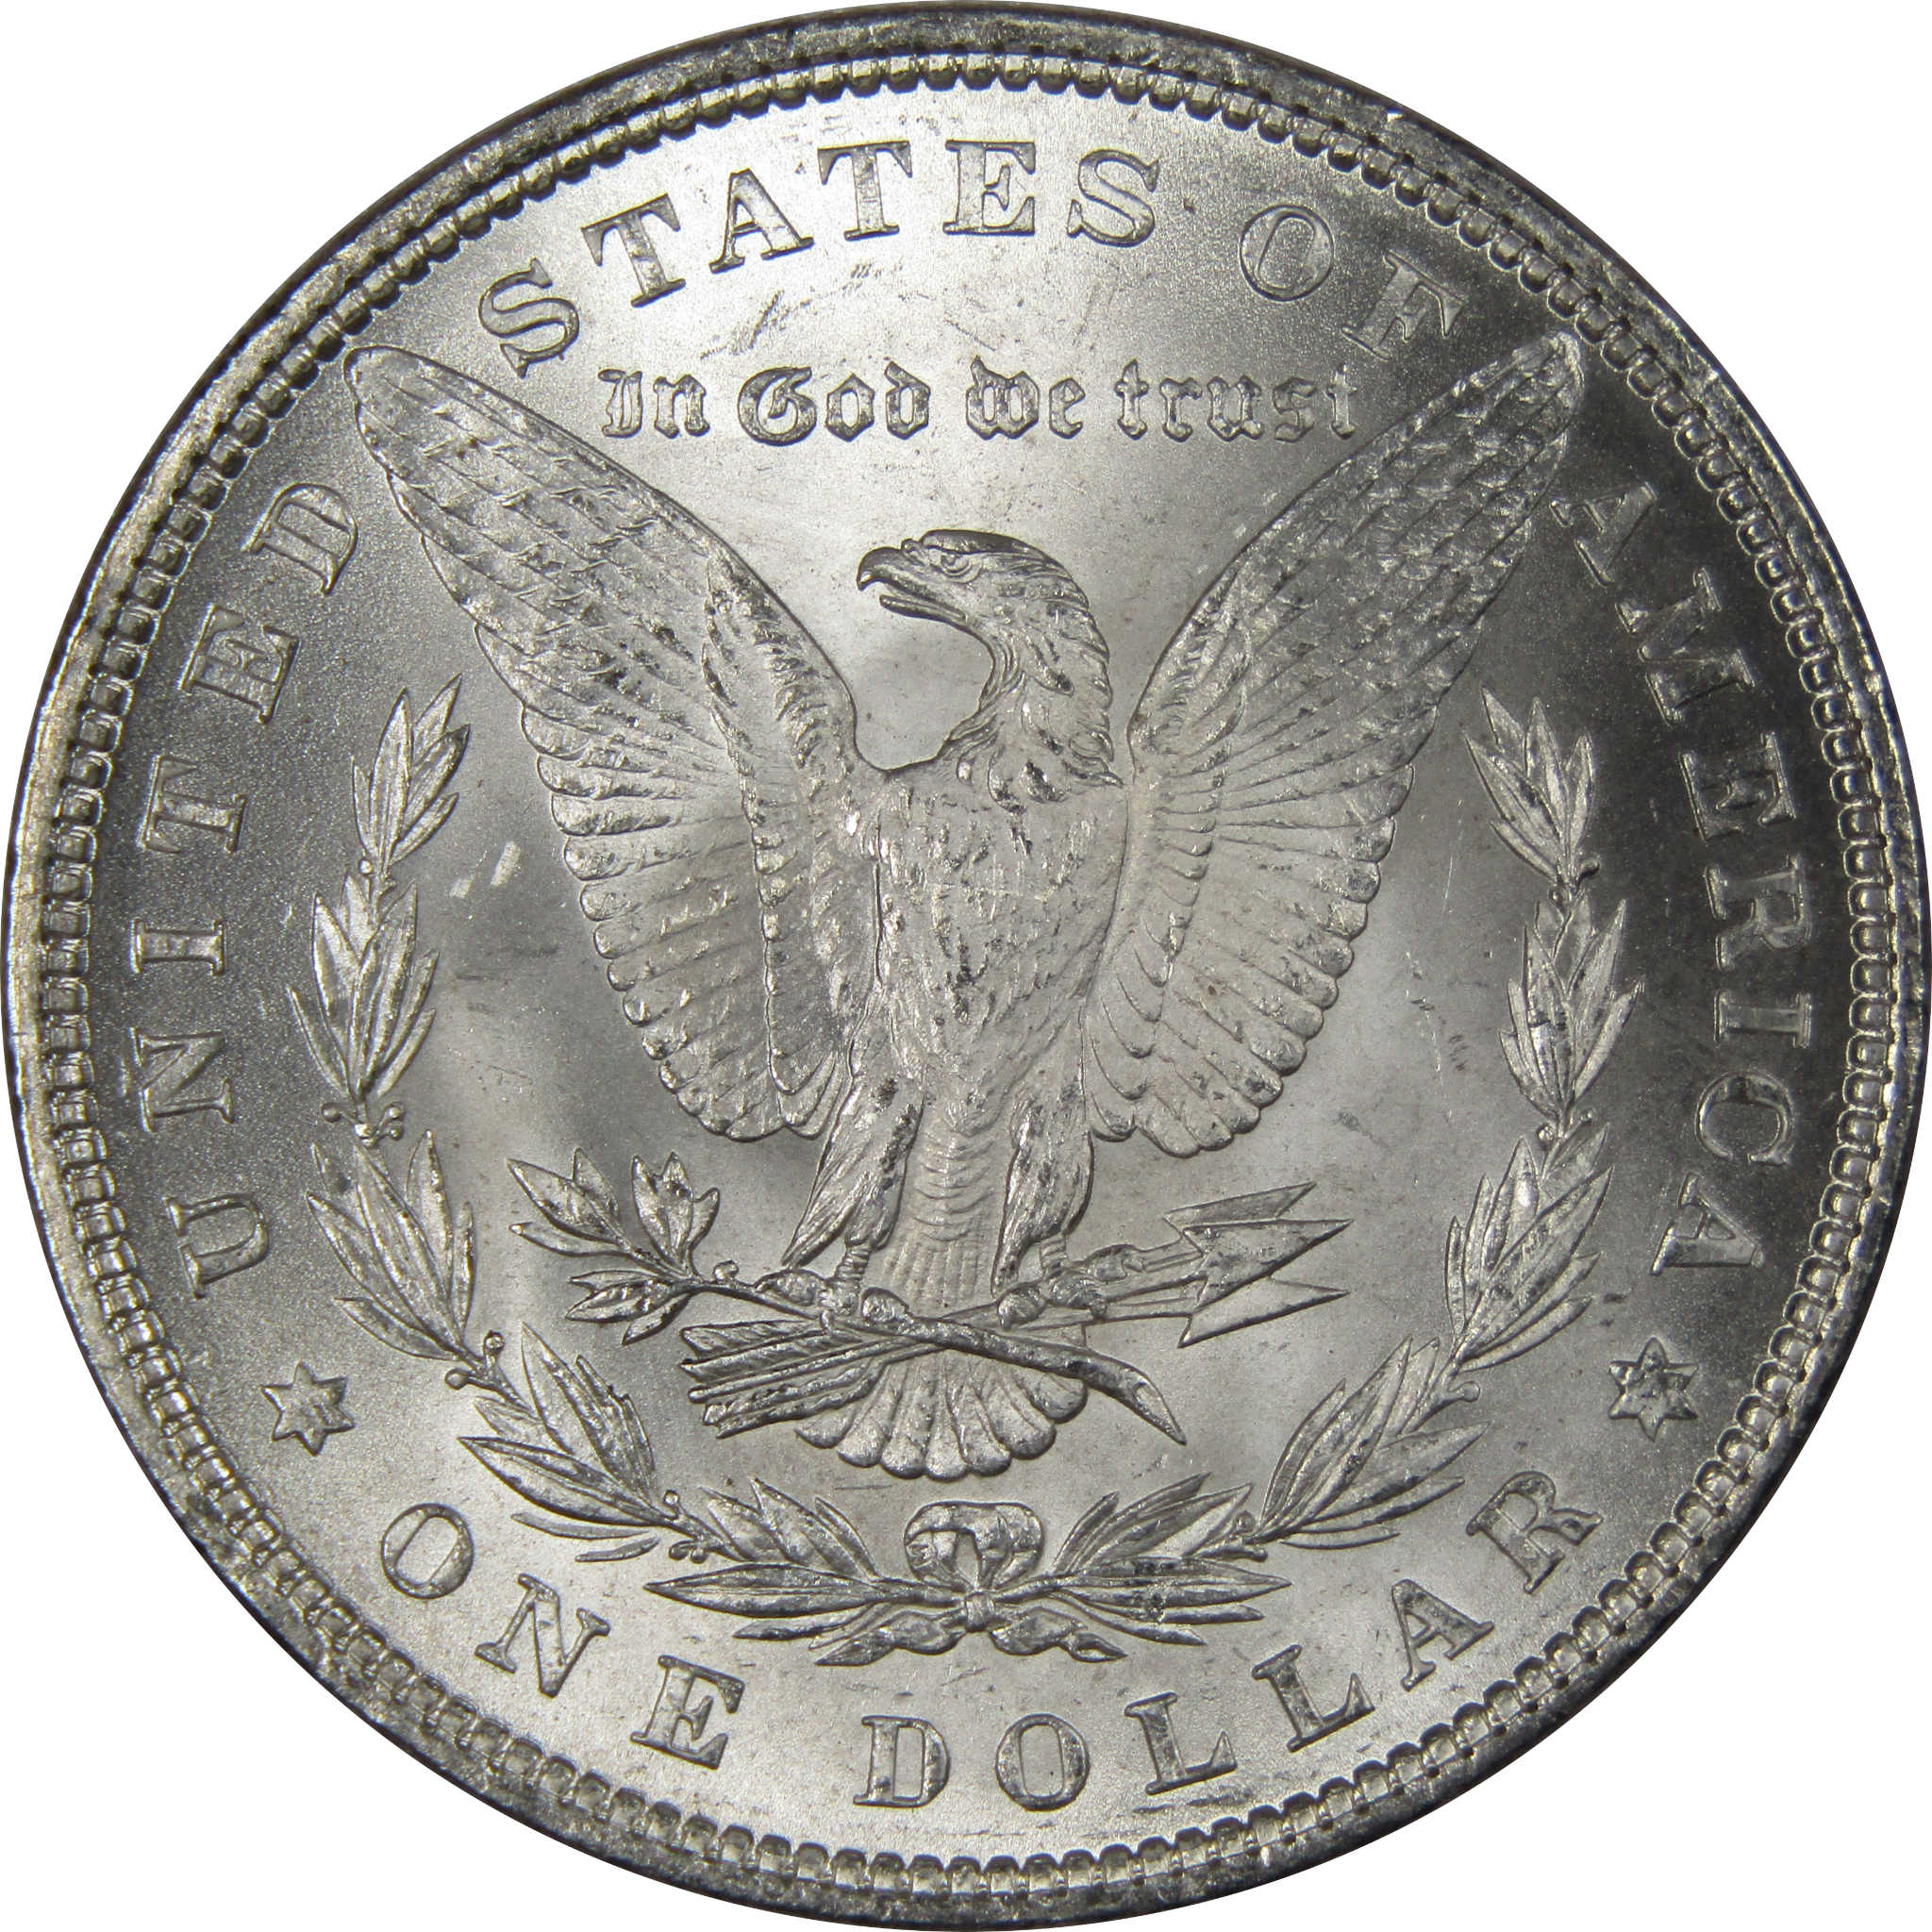 1882 Morgan Dollar BU Uncirculated Mint State 90% Silver SKU:IPC9646 - Morgan coin - Morgan silver dollar - Morgan silver dollar for sale - Profile Coins &amp; Collectibles